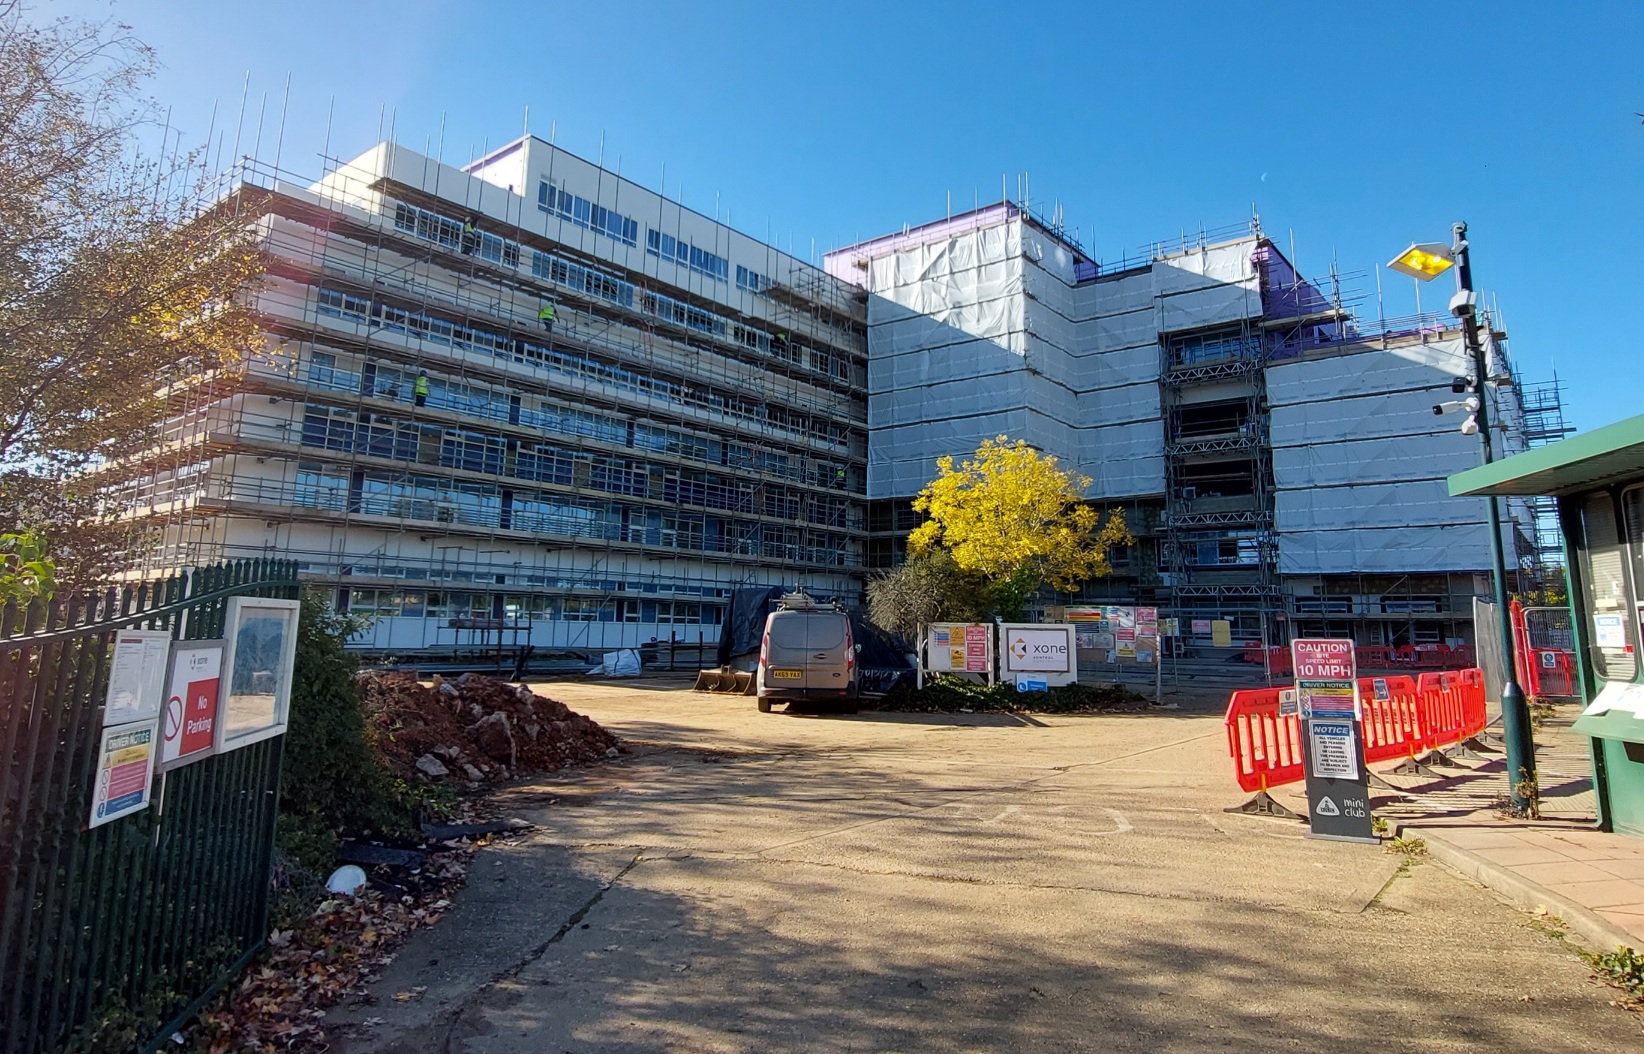 Apartments replacing former Mothercare HQ